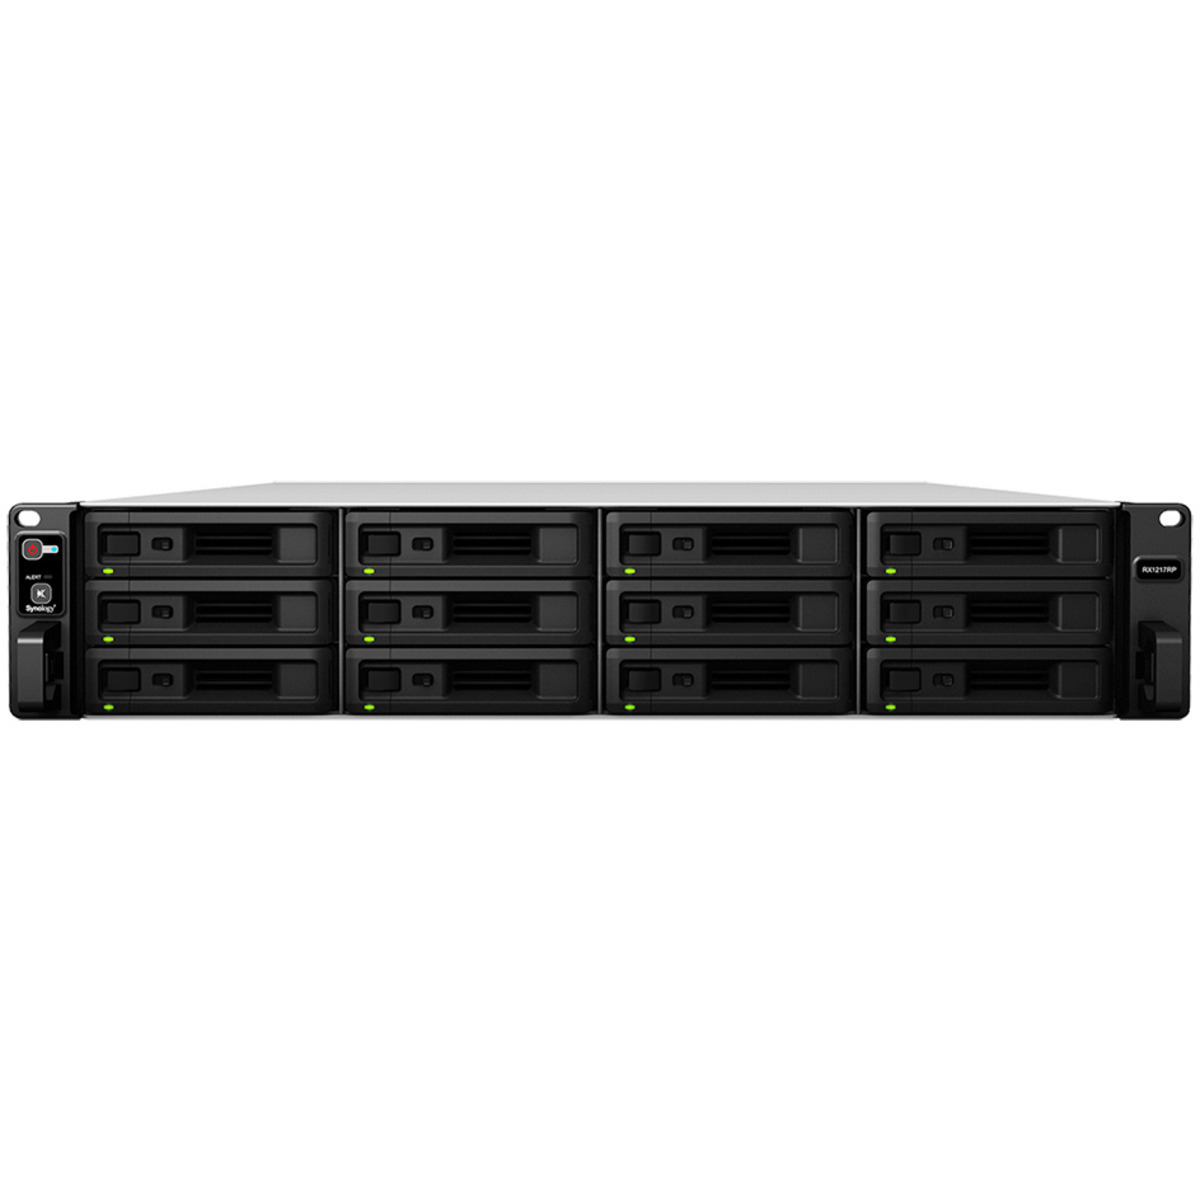 buy $12536 Synology RX1217 96tb RackMount Expansion Enclosure 12x8000gb Samsung 870 QVO MZ-77Q8T0 2.5 SATA 6Gb/s SSD CONSUMER Class Drives Installed - Burn-In Tested - nas headquarters buy network attached storage server device das new raid-5 free shipping usa christmas new year holiday sale RX1217